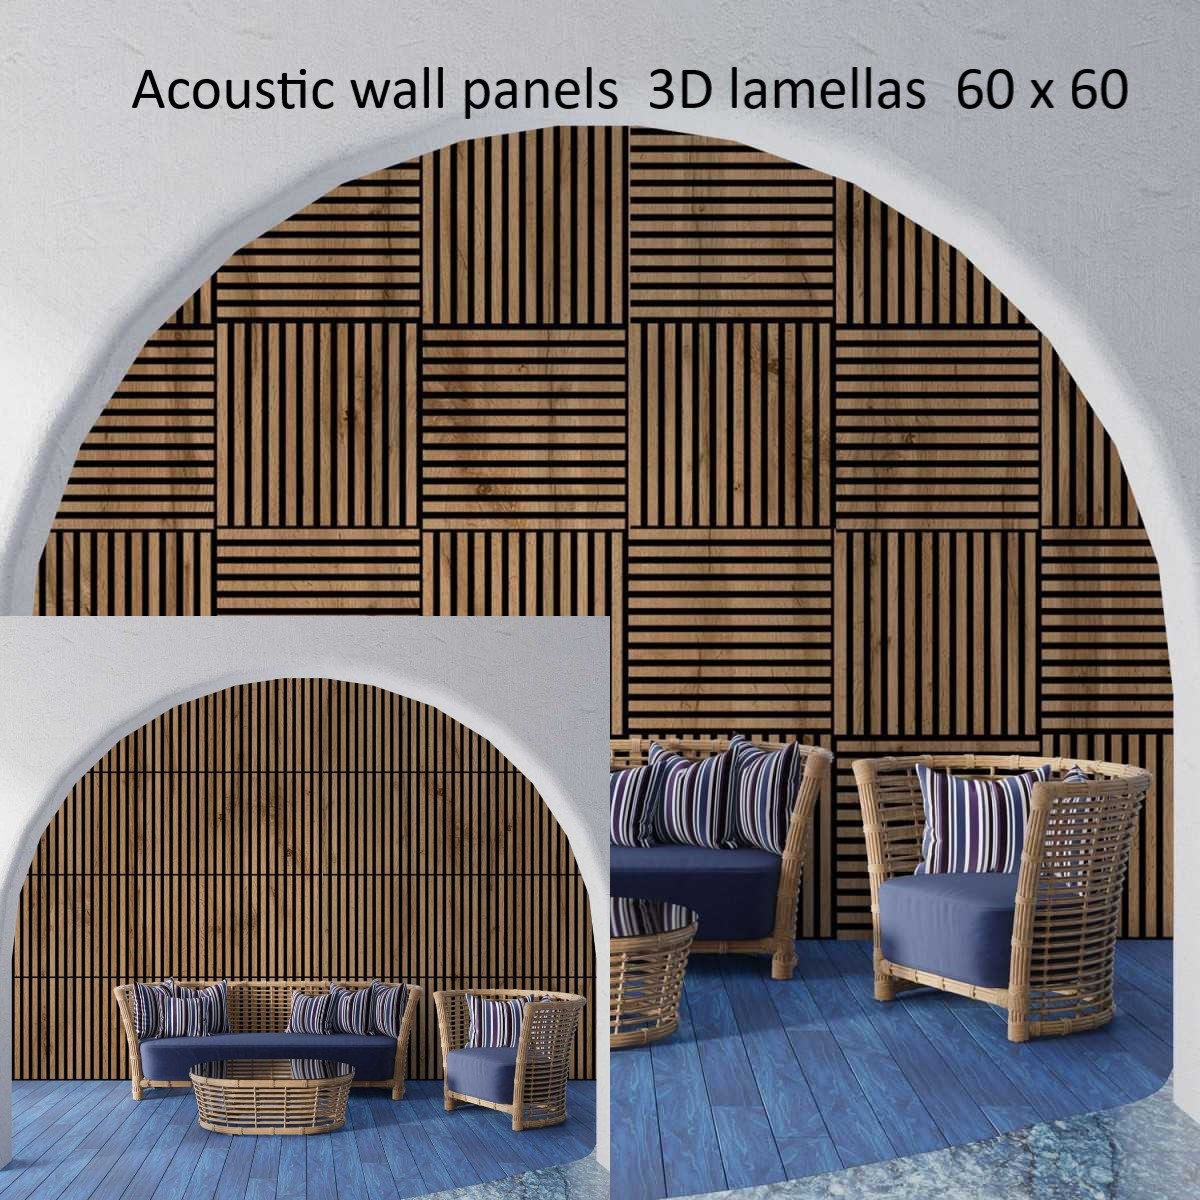 SILENCE AND PEACE - ACOUSTIC PANELS